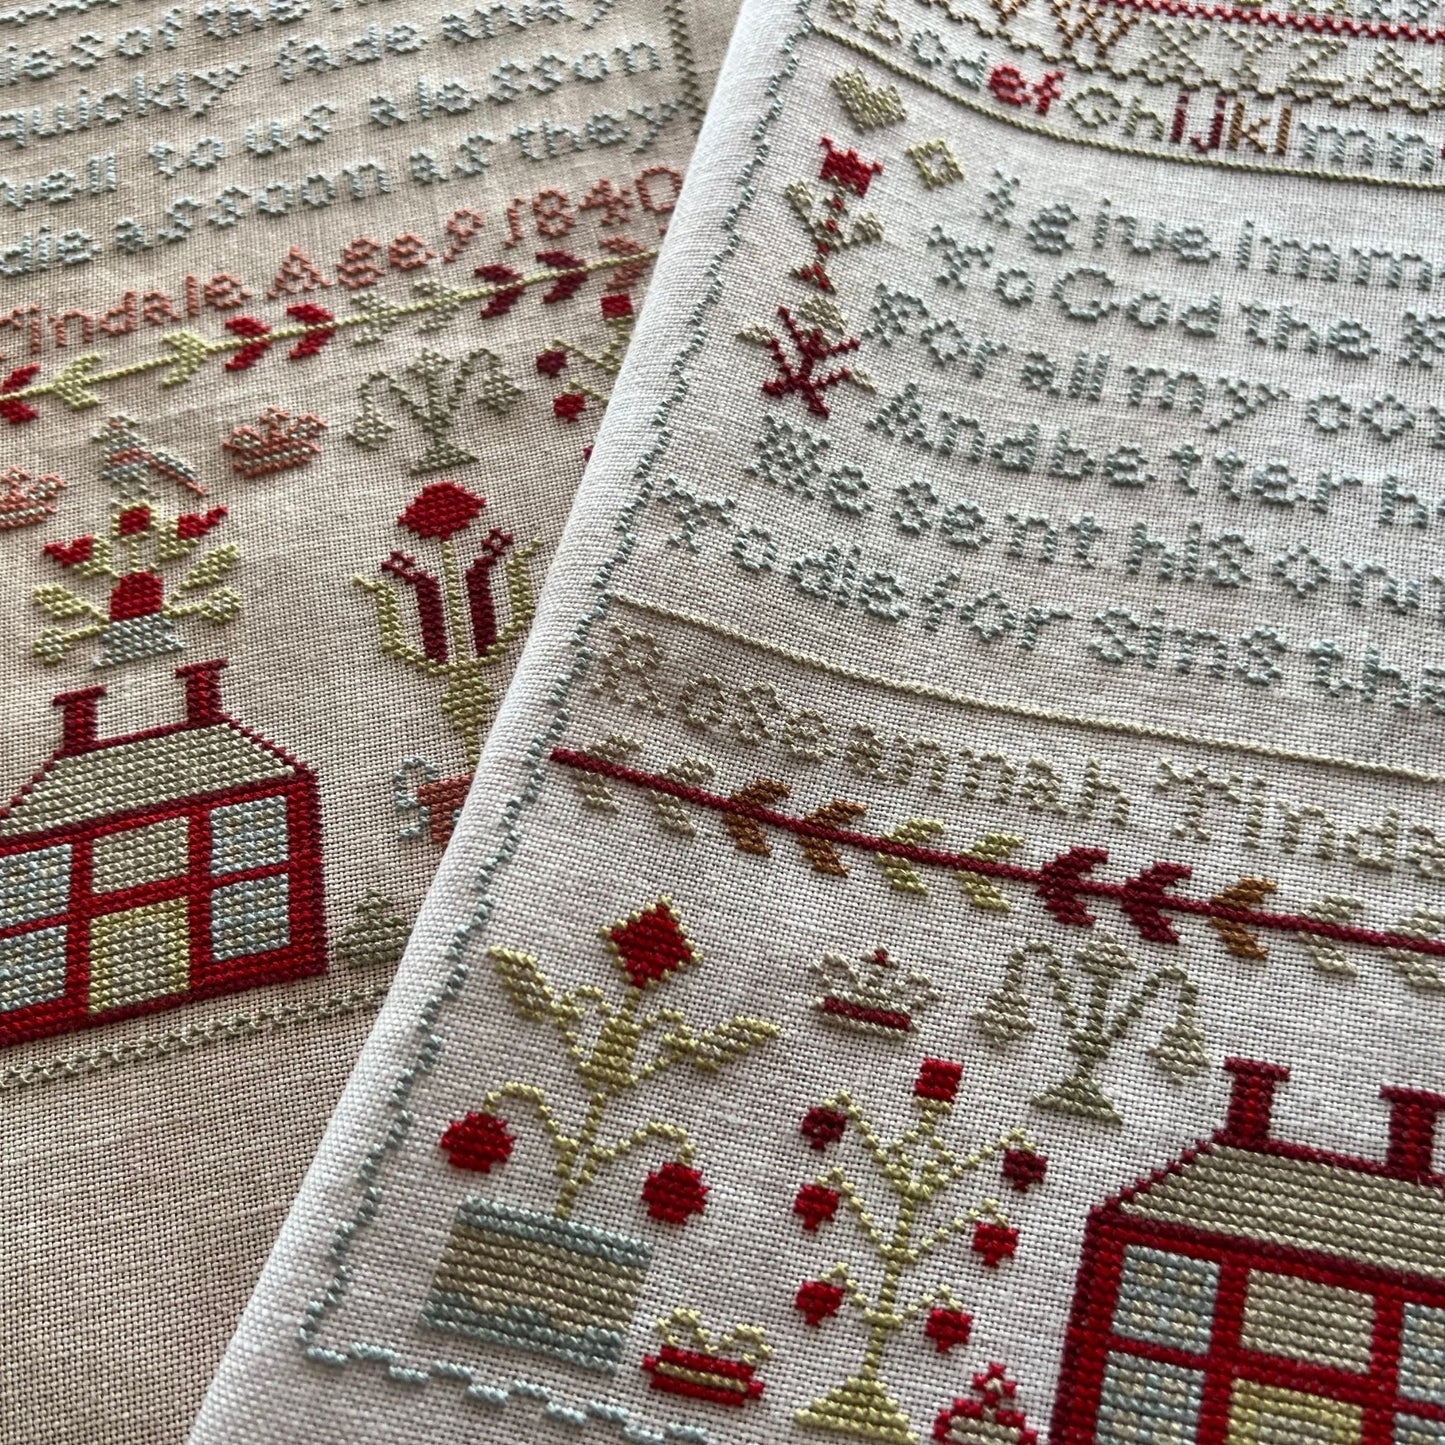 Thread Pack No chart for Tindale Sisters 1840 Samplers